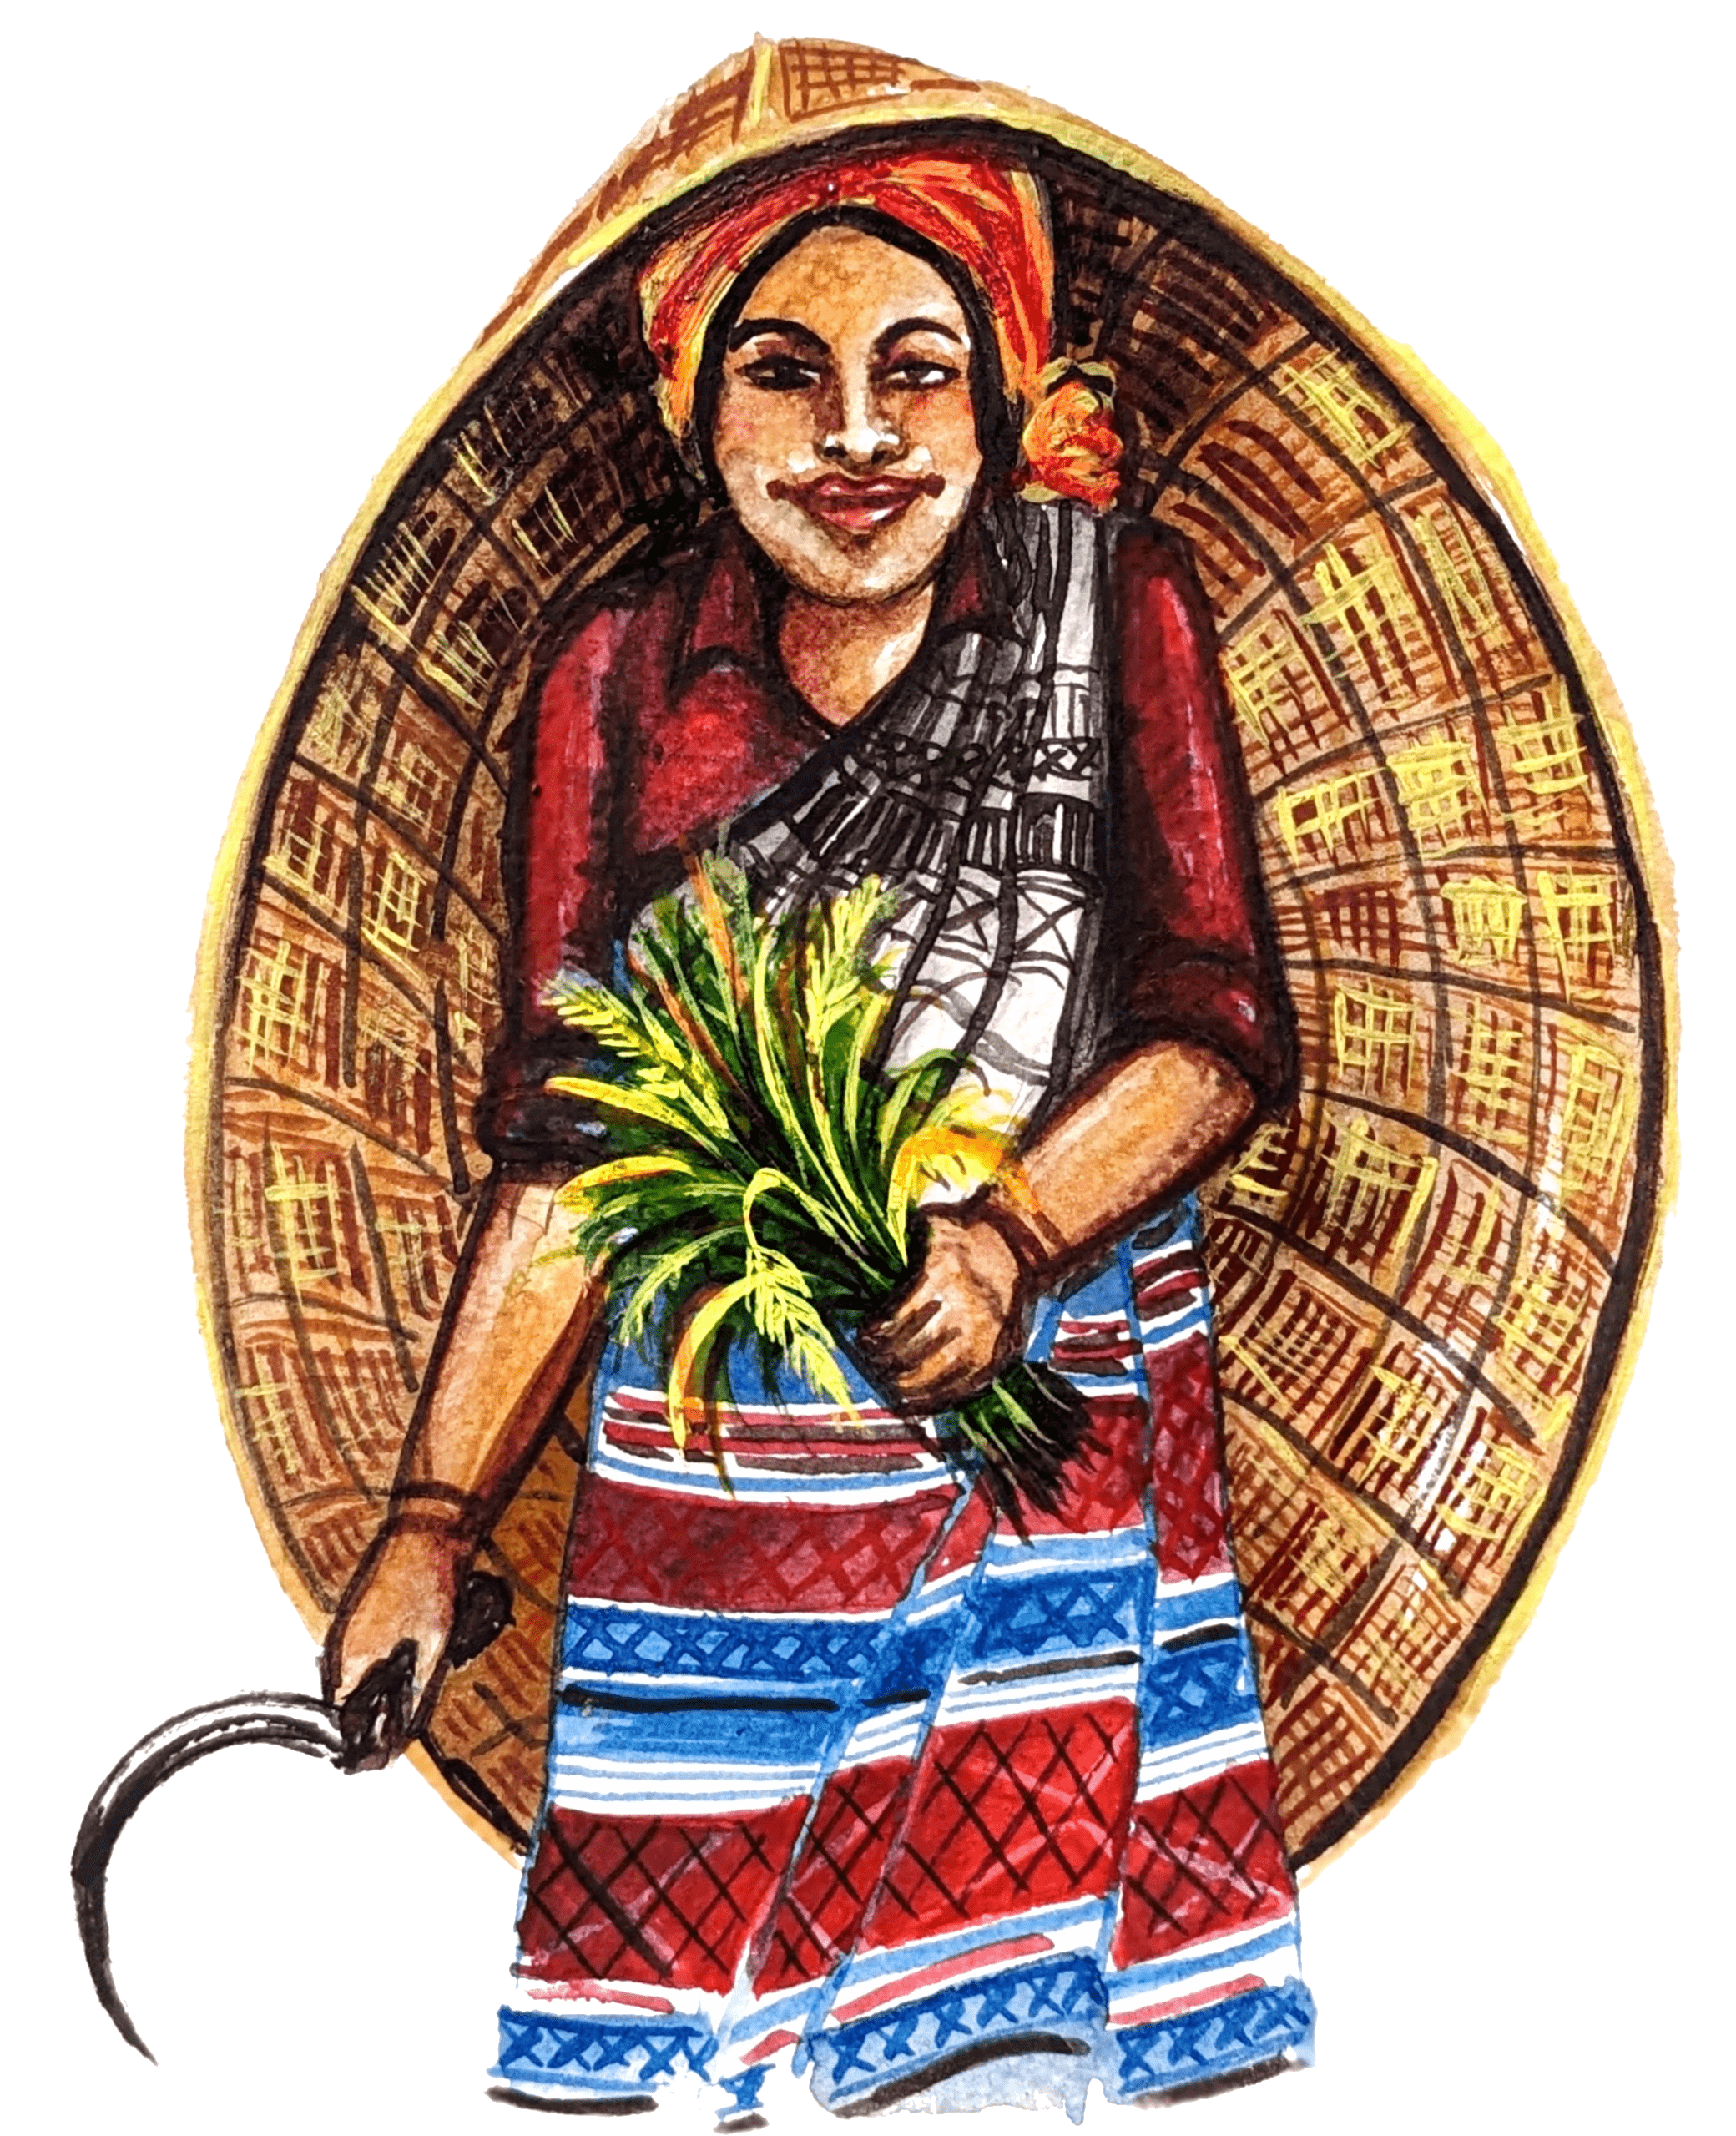 Water color painting of a Khasi woman farmer with a sickle wearing traditional tap-moh khlieh